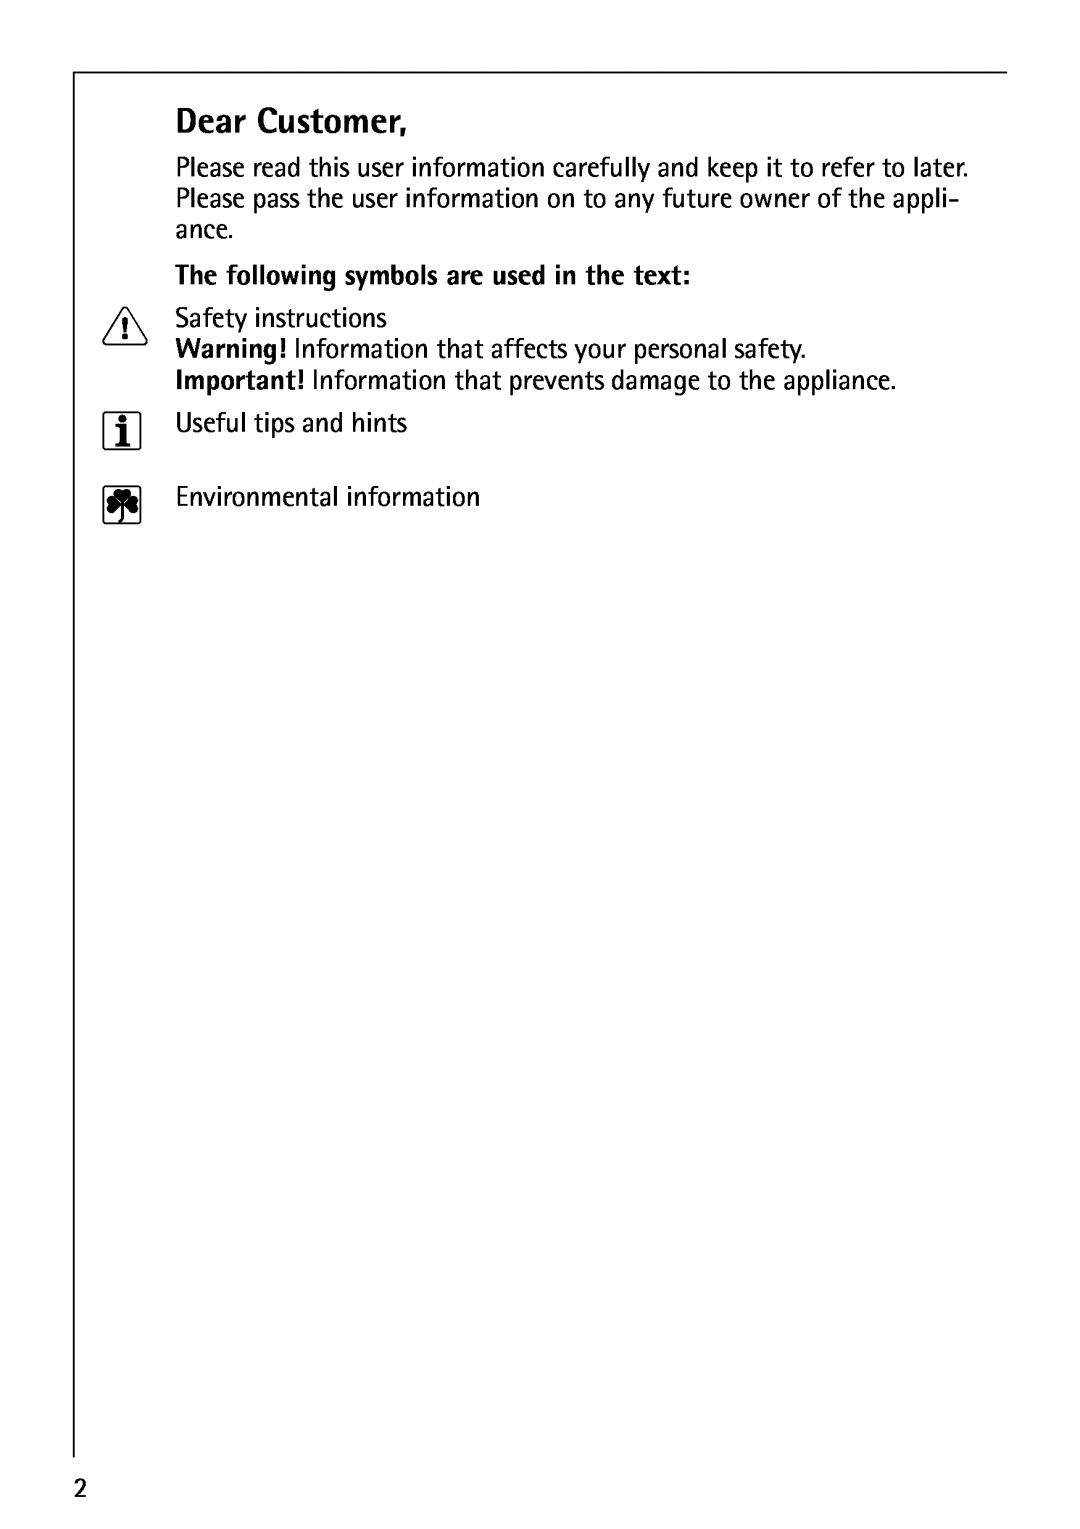 AEG 40660 manual The following symbols are used in the text 